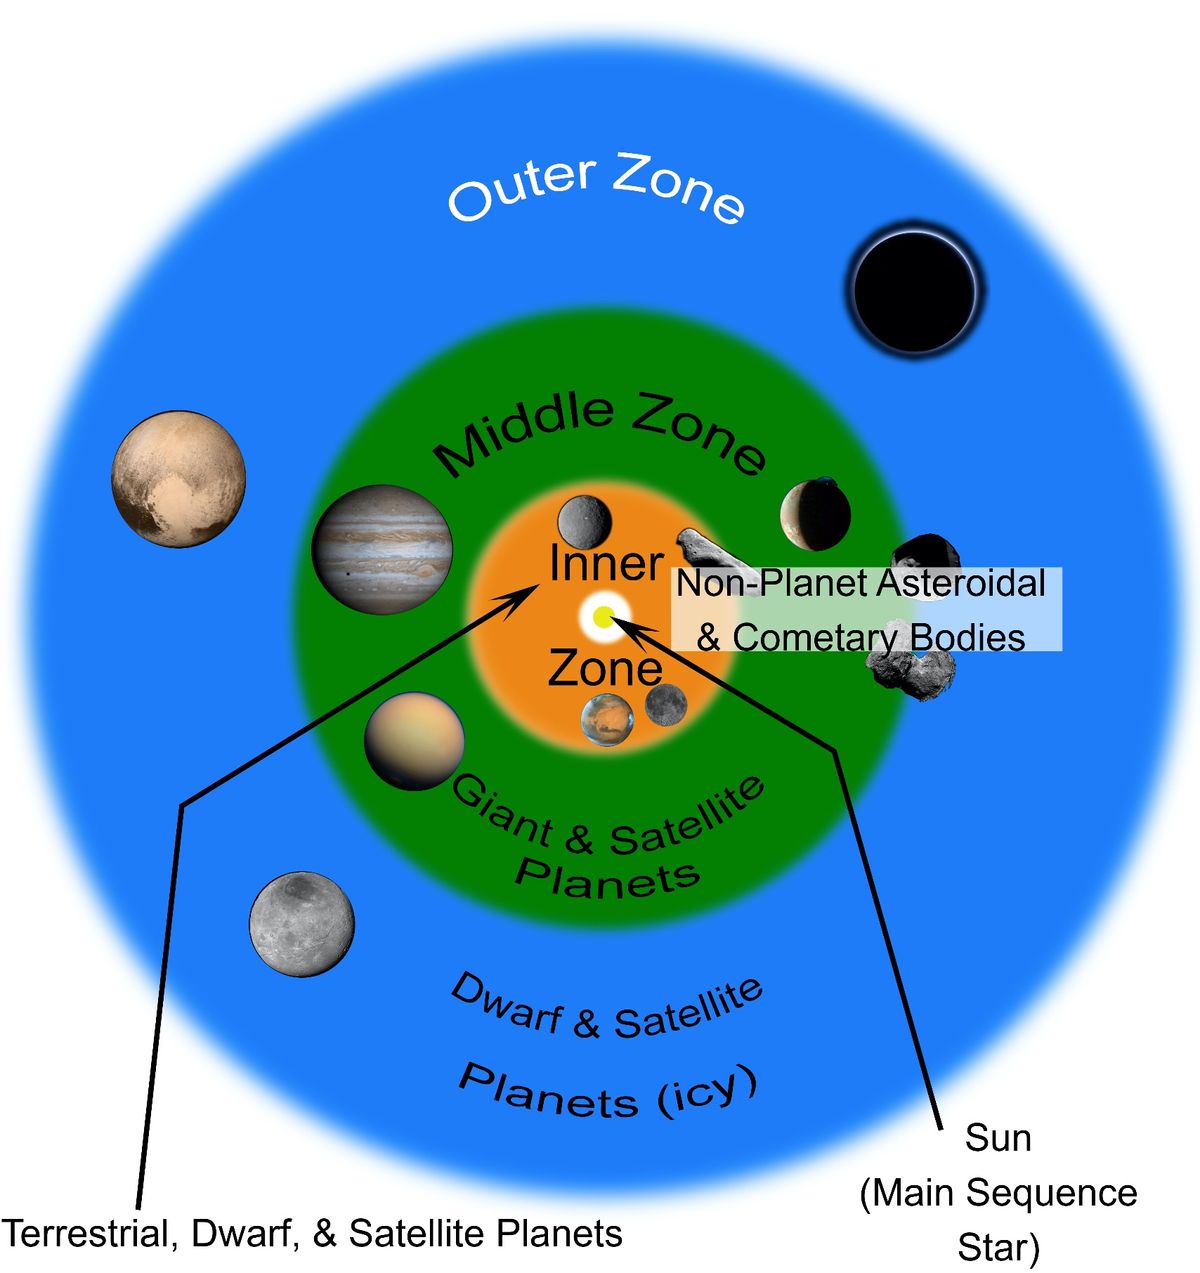 Solar System Overview, Planets & Moons - Video & Lesson Transcript